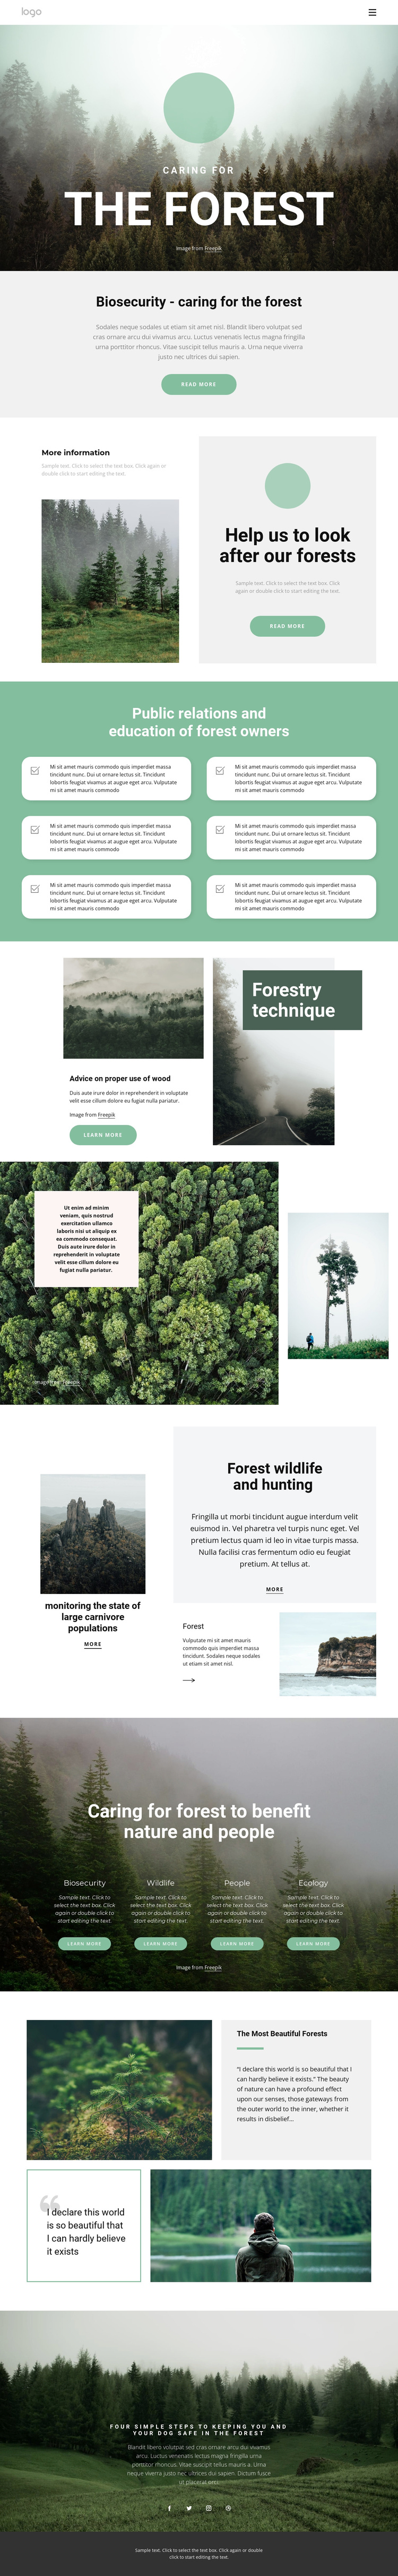 Caring for parks and forests Joomla Template